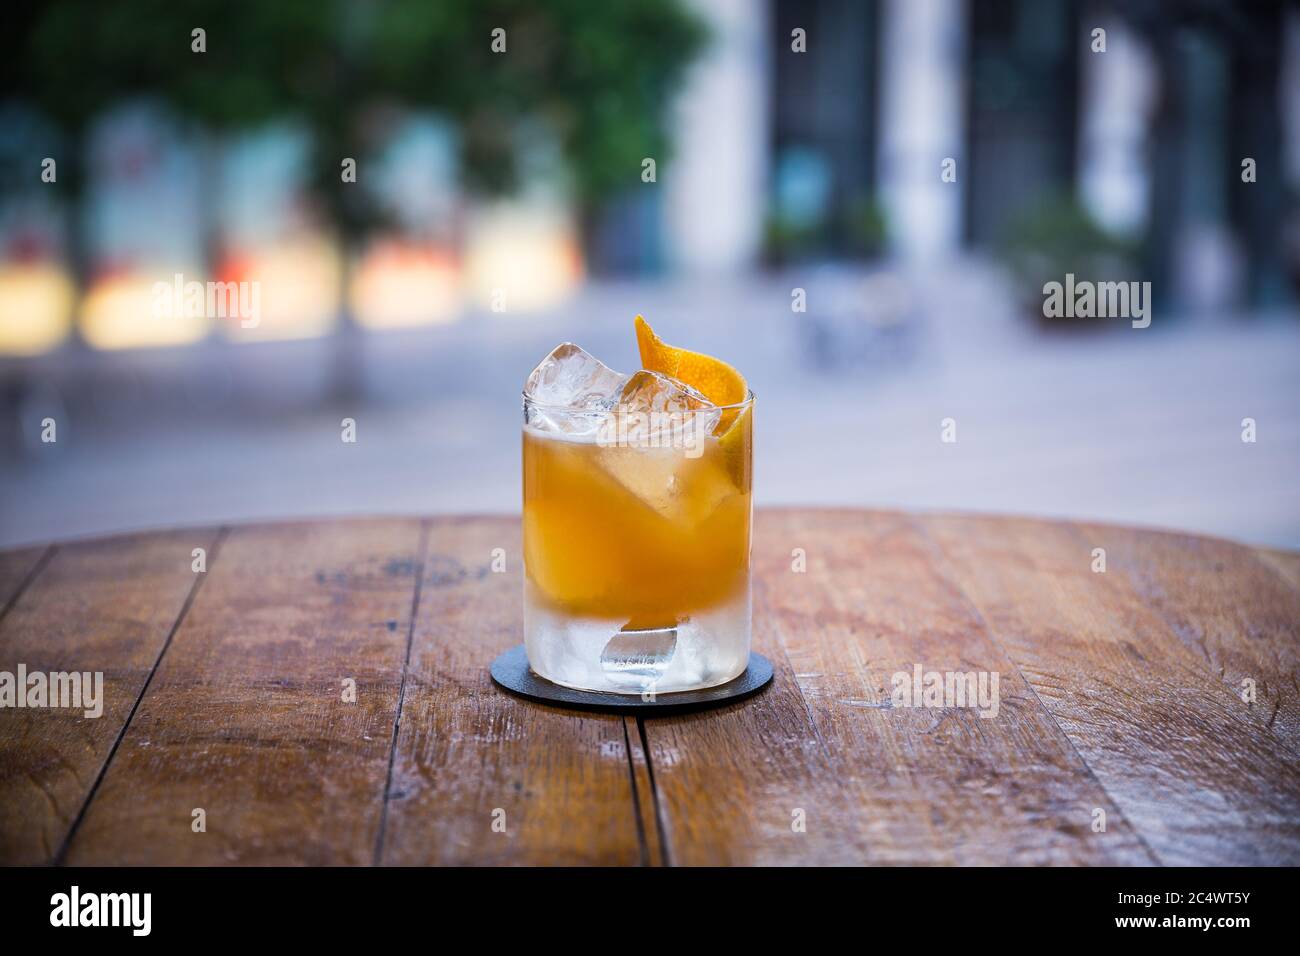 you can see a tasty yellow-colored cocktail on ice standing on a wooden table and the background is blurred Stock Photo